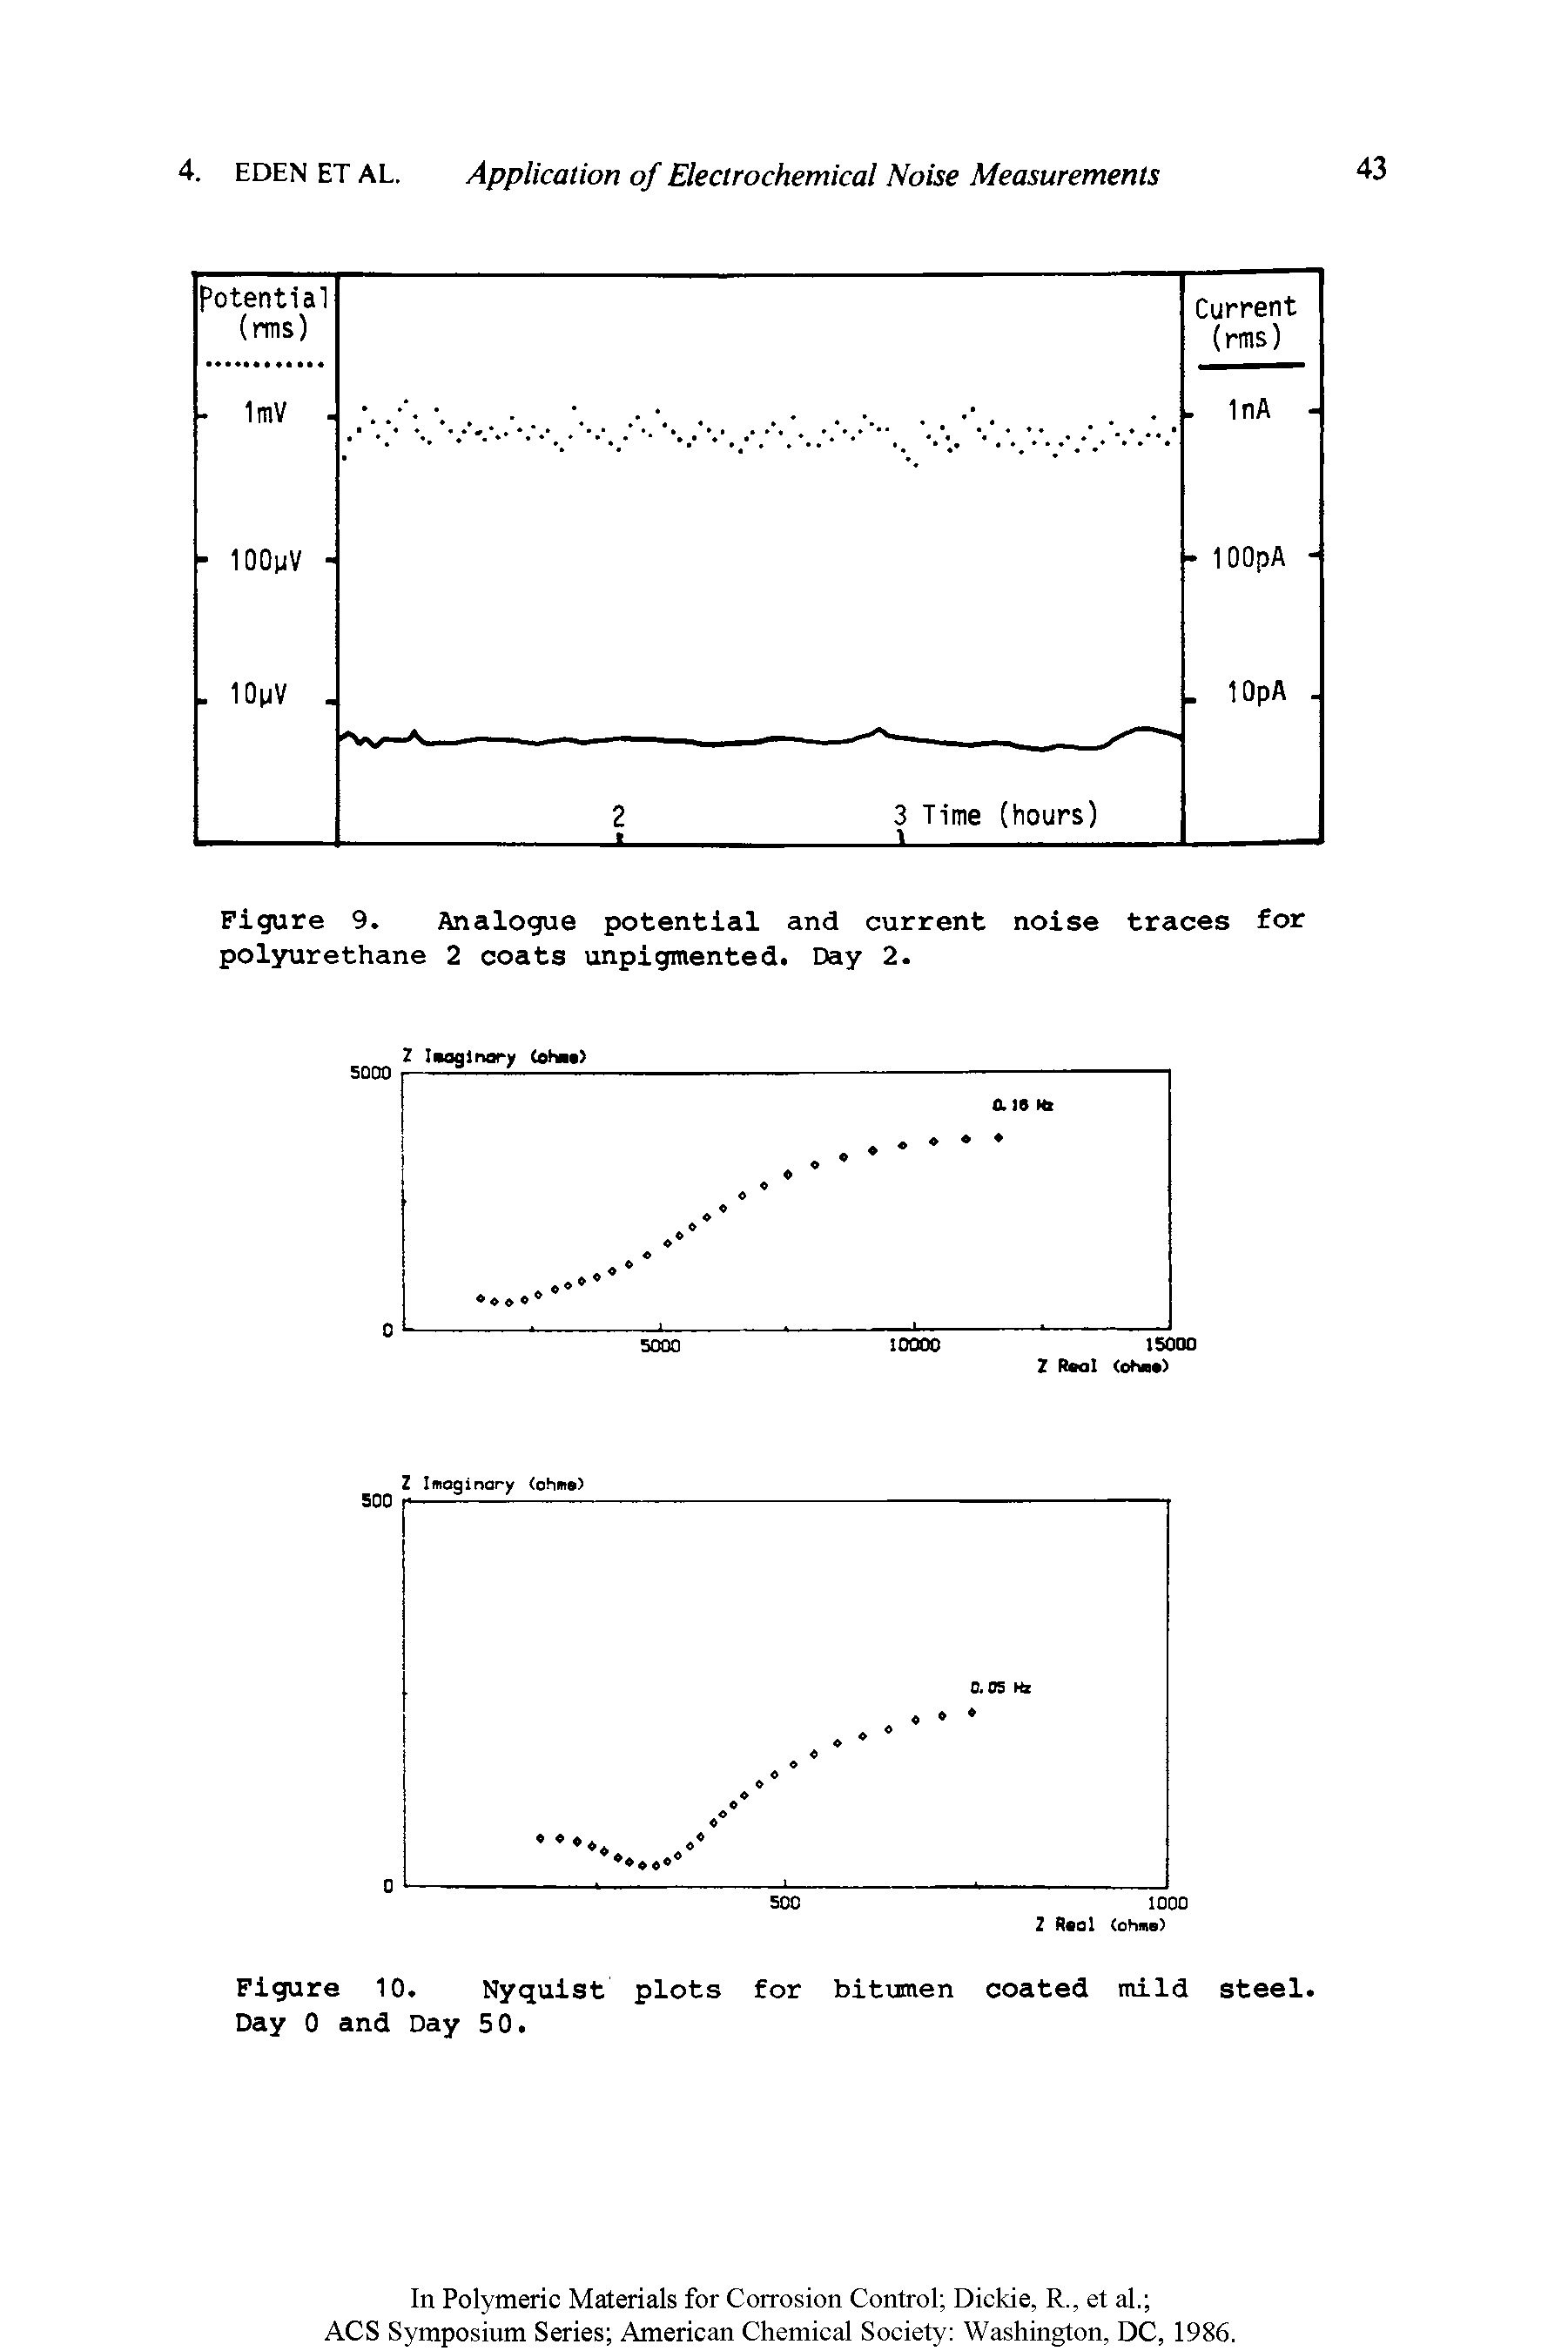 Figure 10. Nyquist plots for bitumen coated mild steel. Day 0 and Day 50.